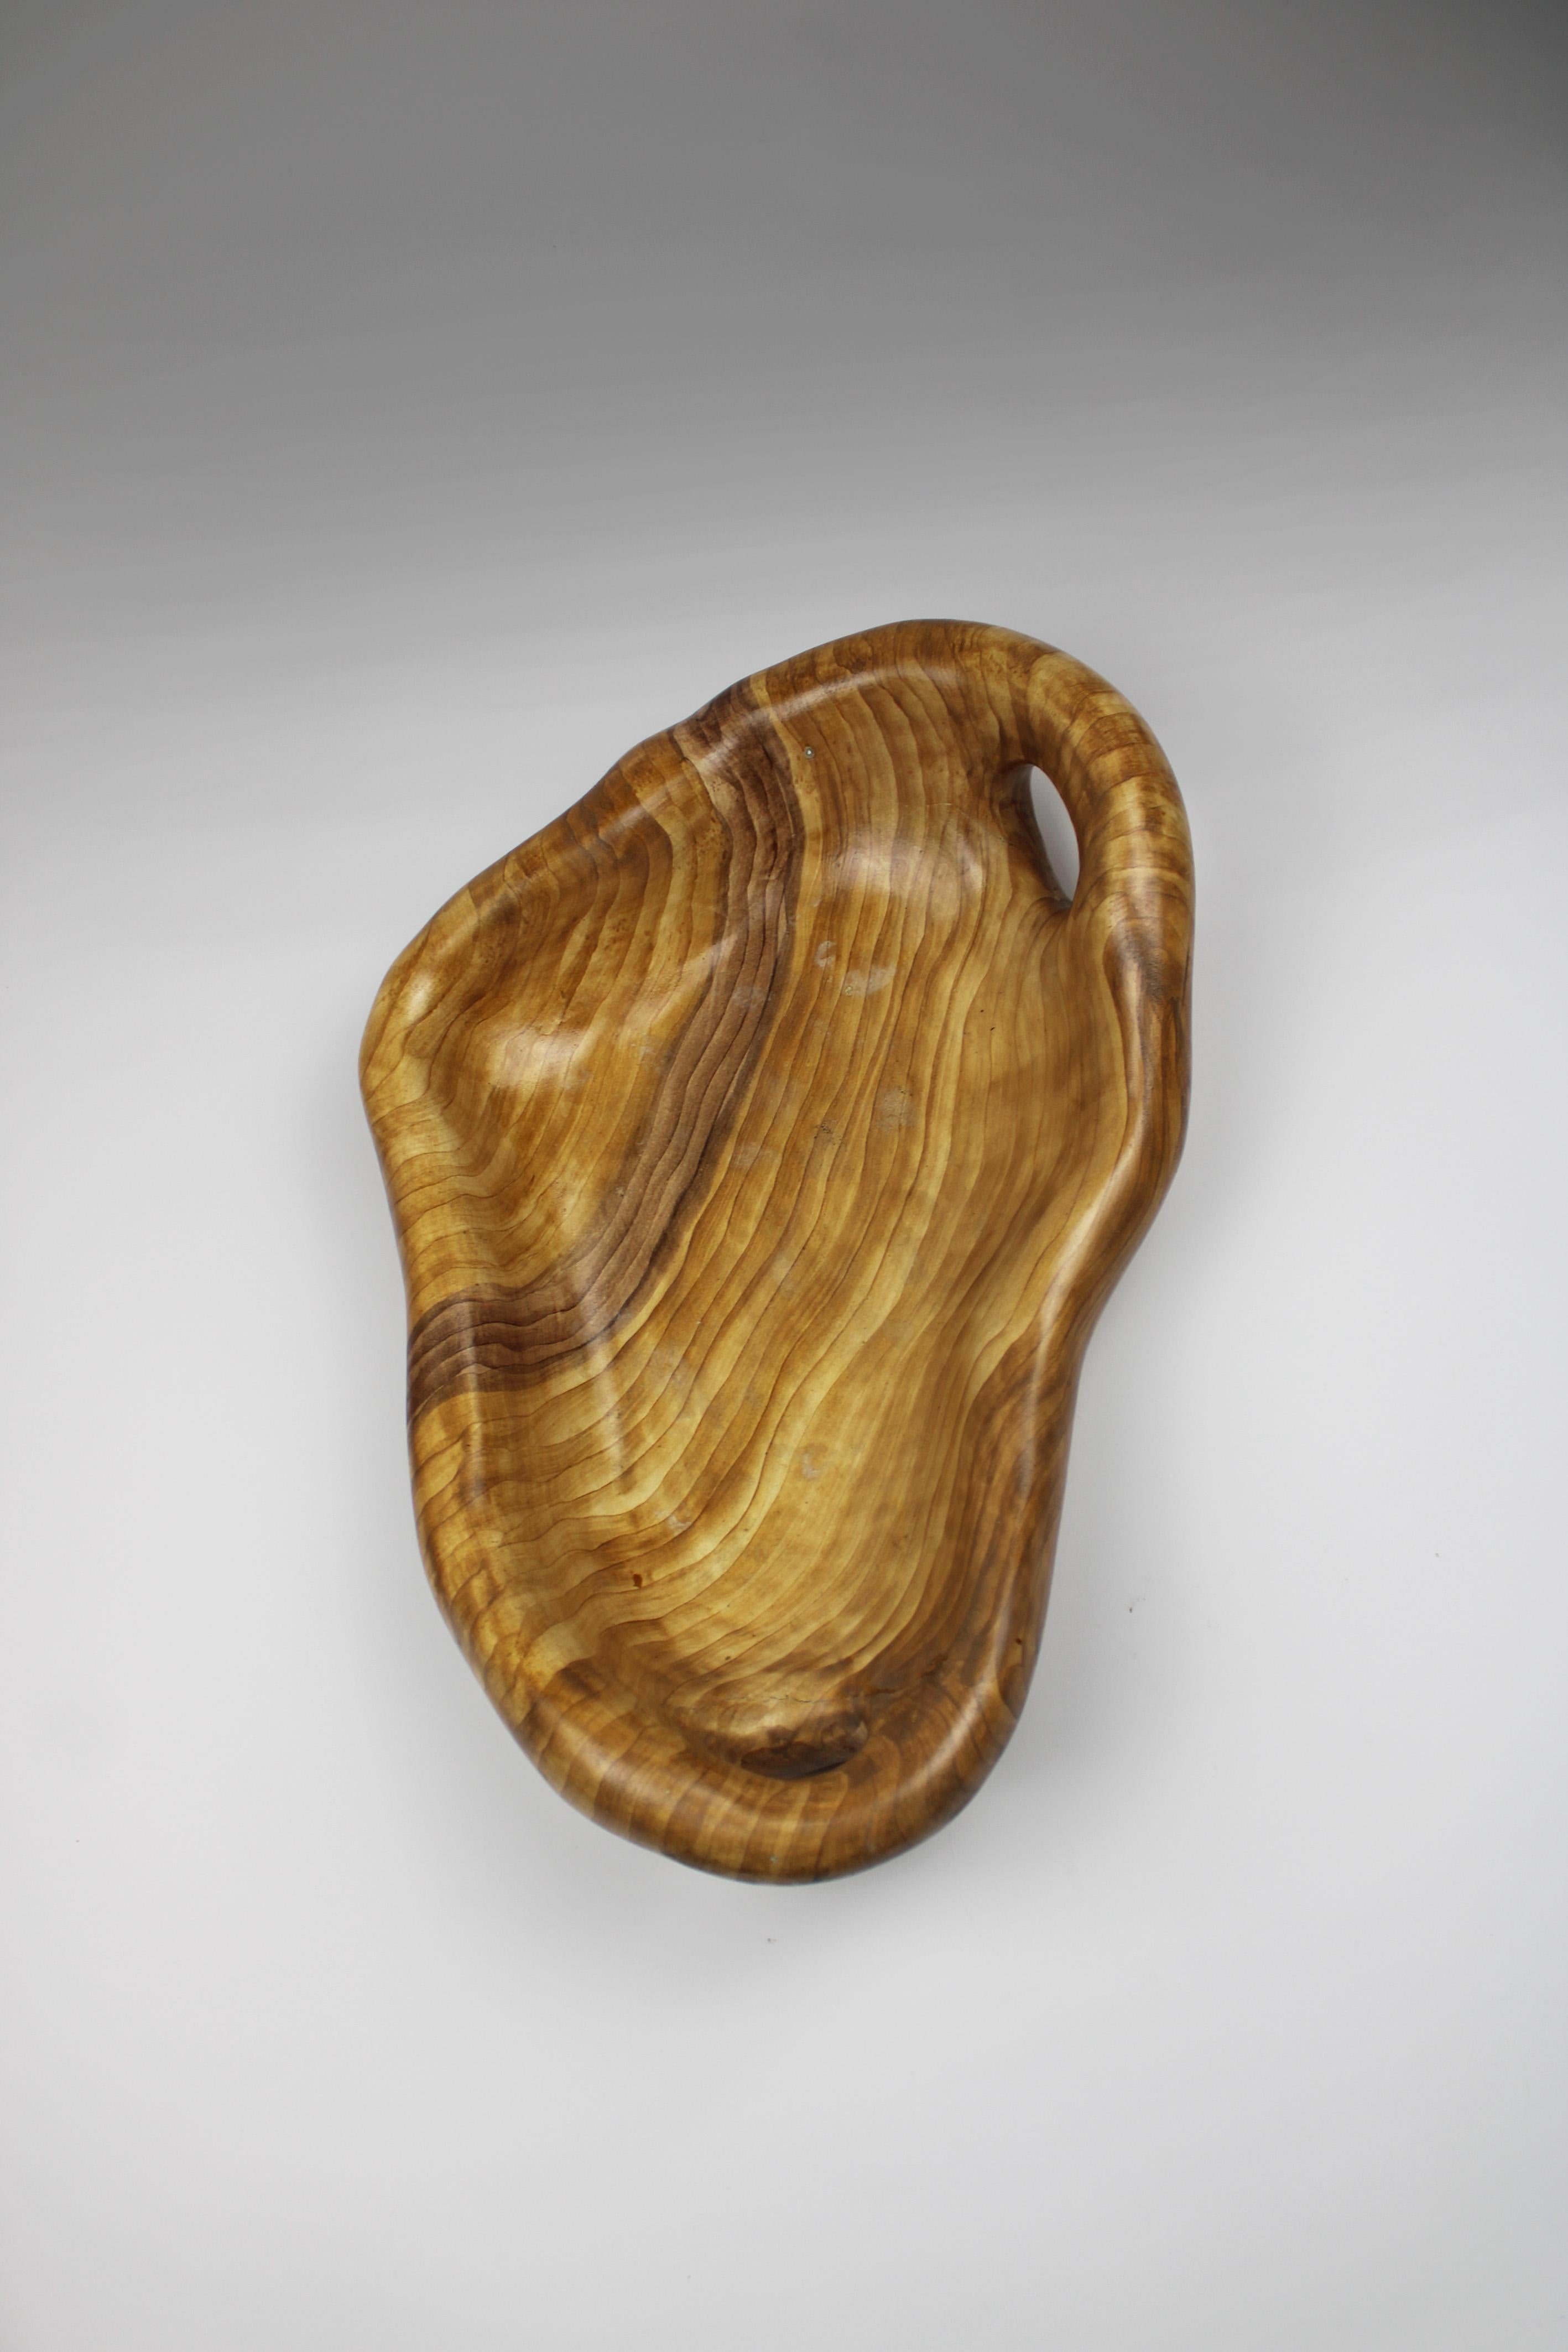 Elevate your home decor with the exquisite charm of this captivating Faux Bois fruit bowl, meticulously crafted by a revered French ceramic manufacturer renowned for its visionary designs, including those by Grandjean Jourdan. With its gracefully